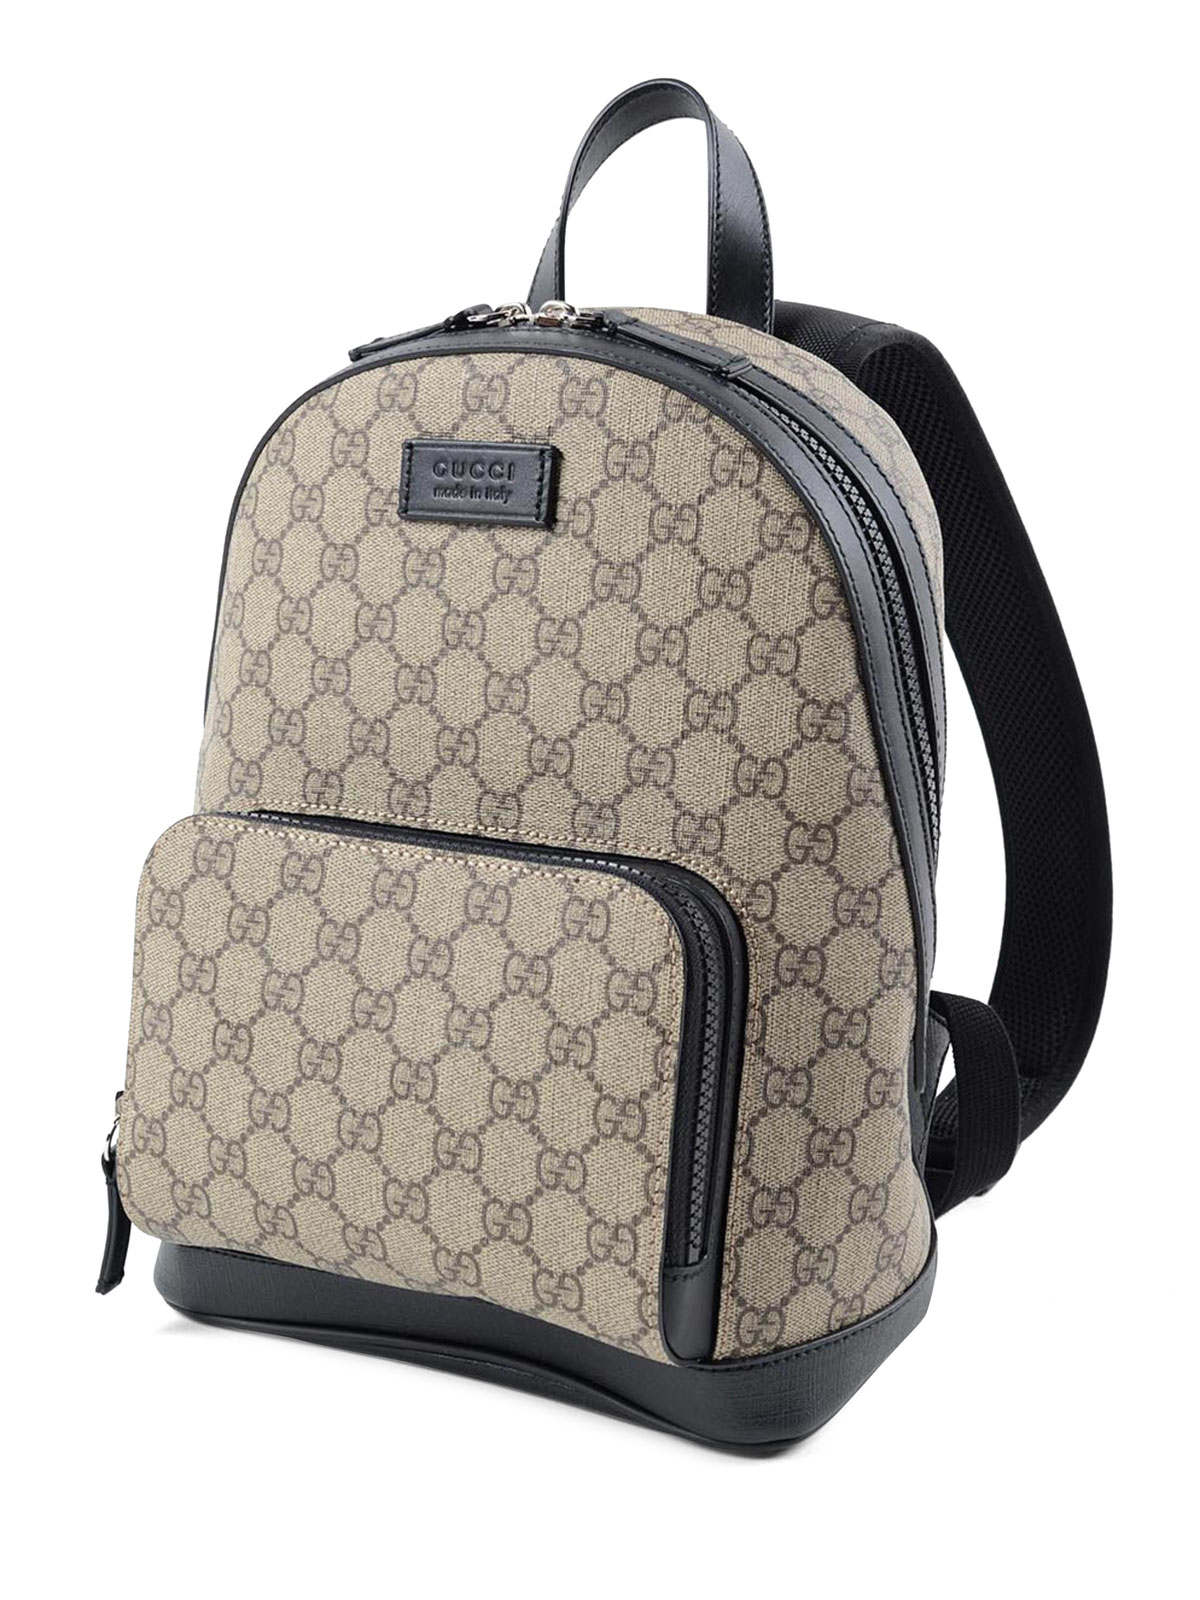 GG Supreme canvas backpack by Gucci - backpacks | iKRIX